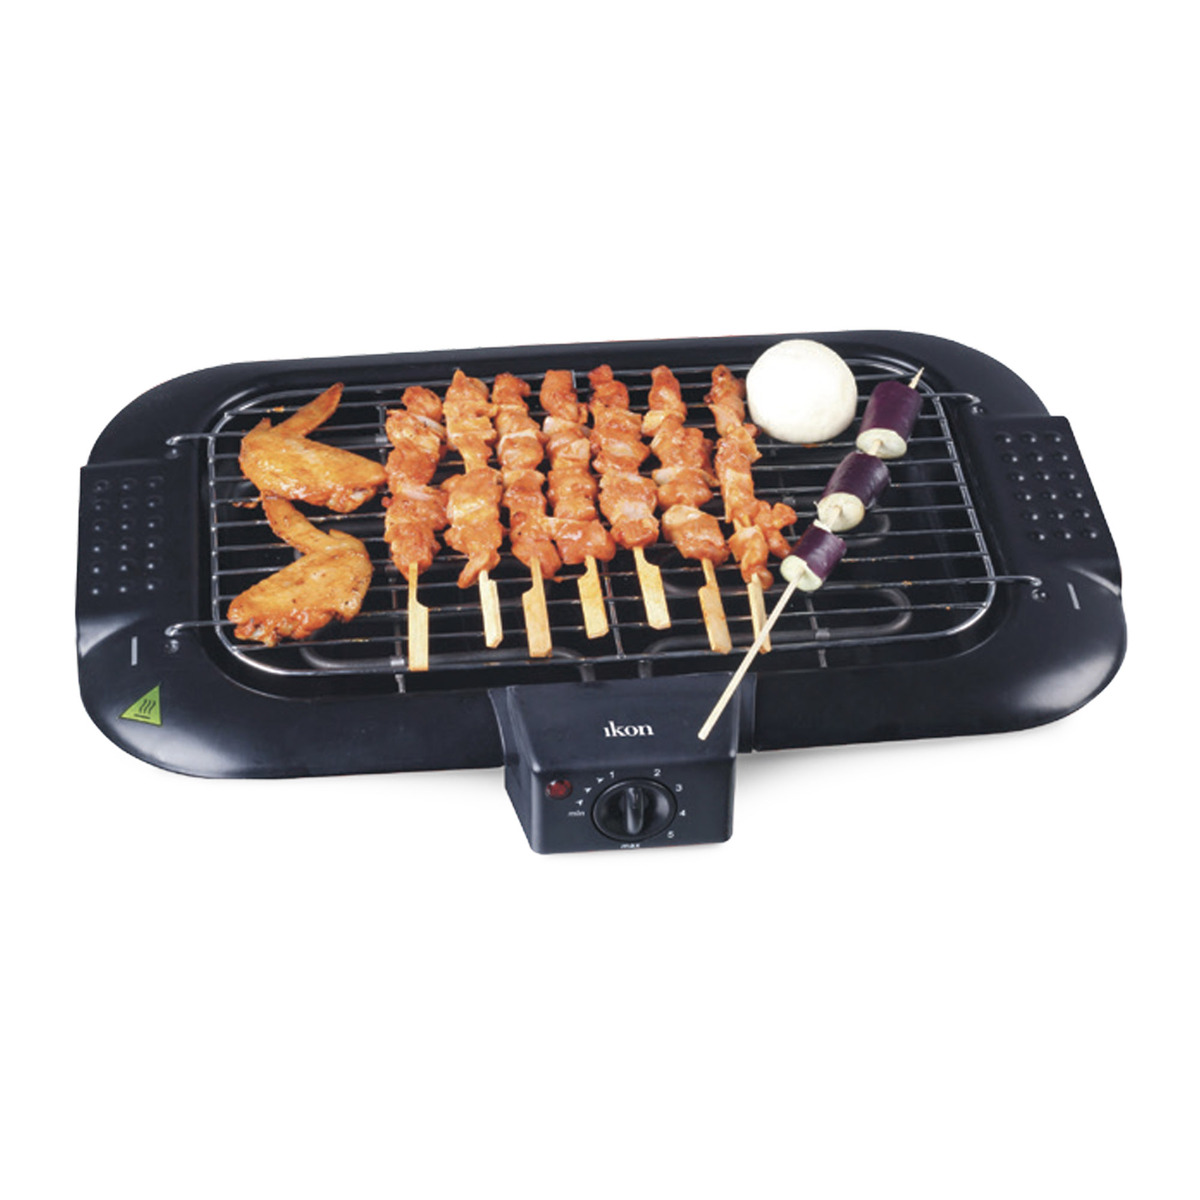 The Best Compact Propane Grill For You Salt of the Earth